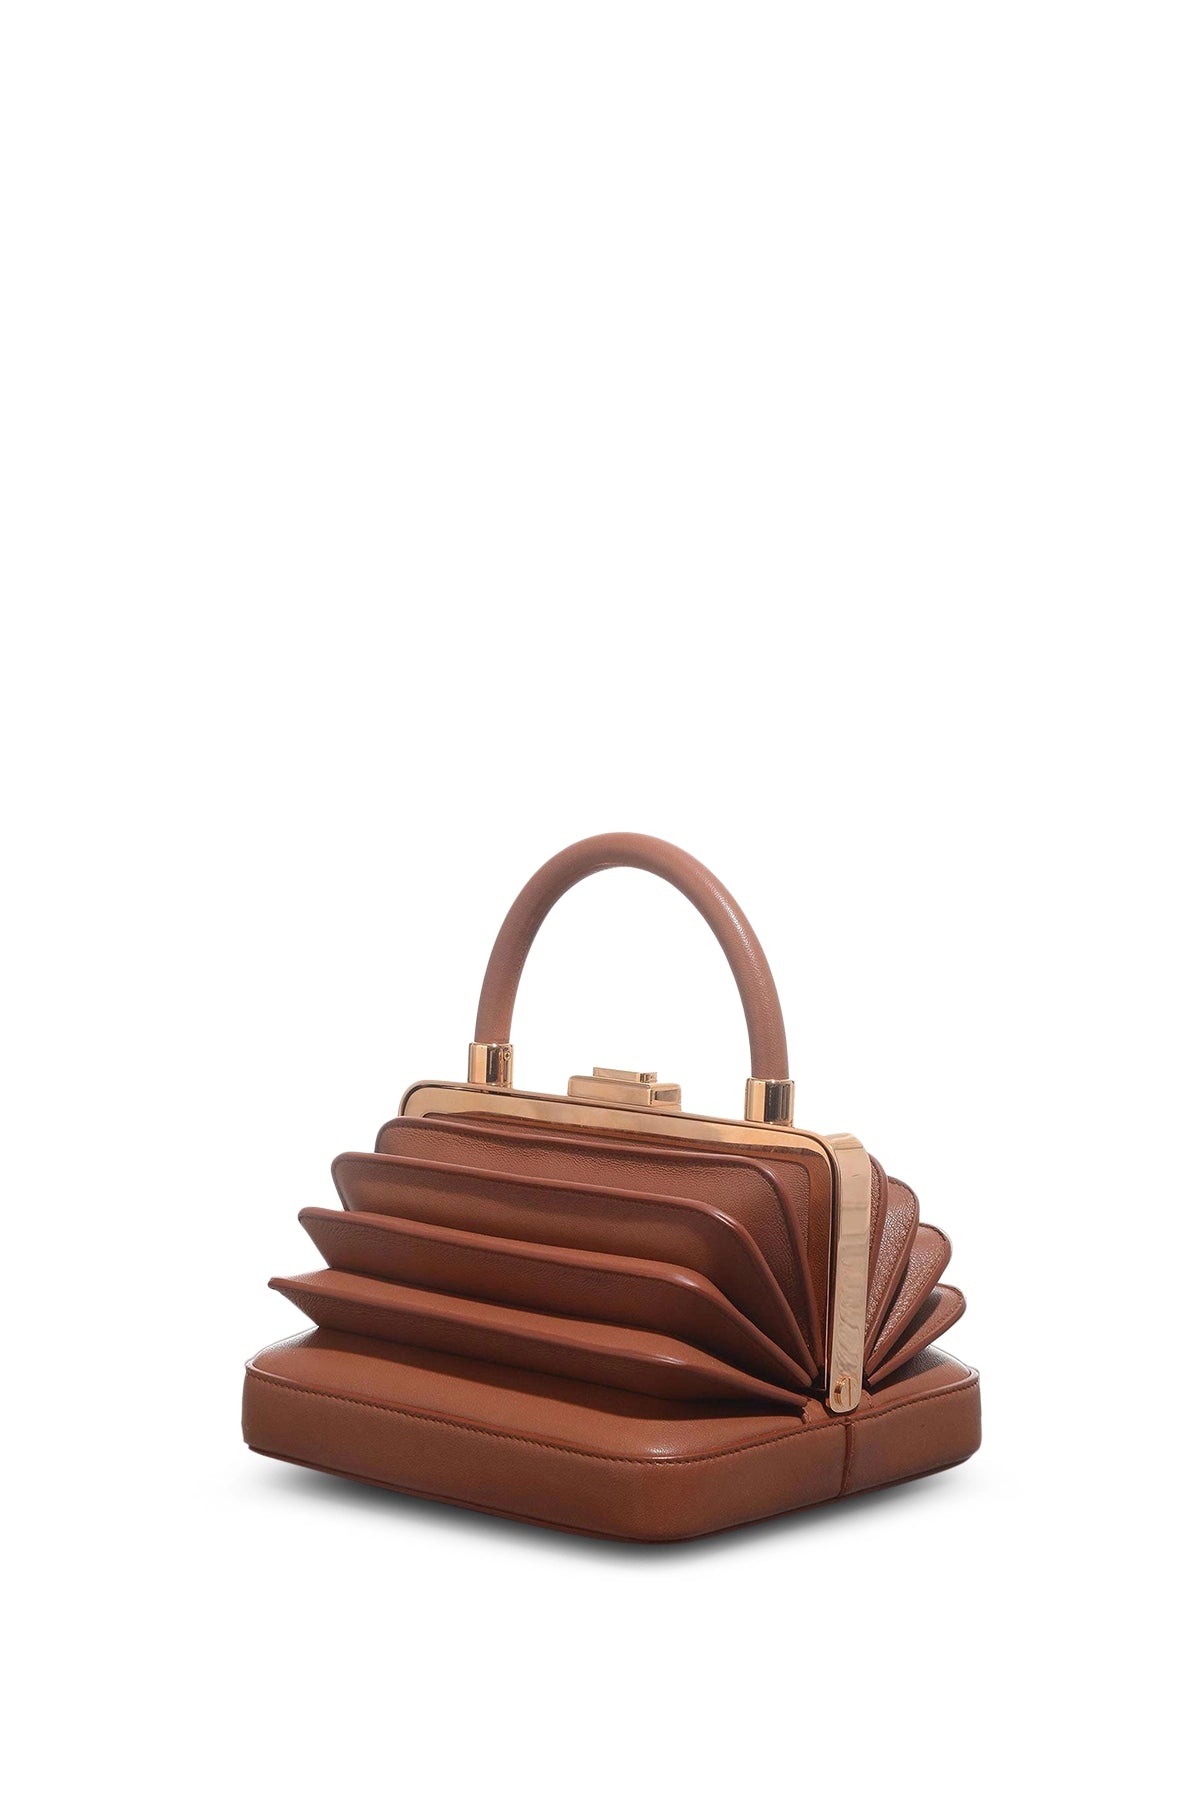 Diana Bag in Cognac Nappa Leather